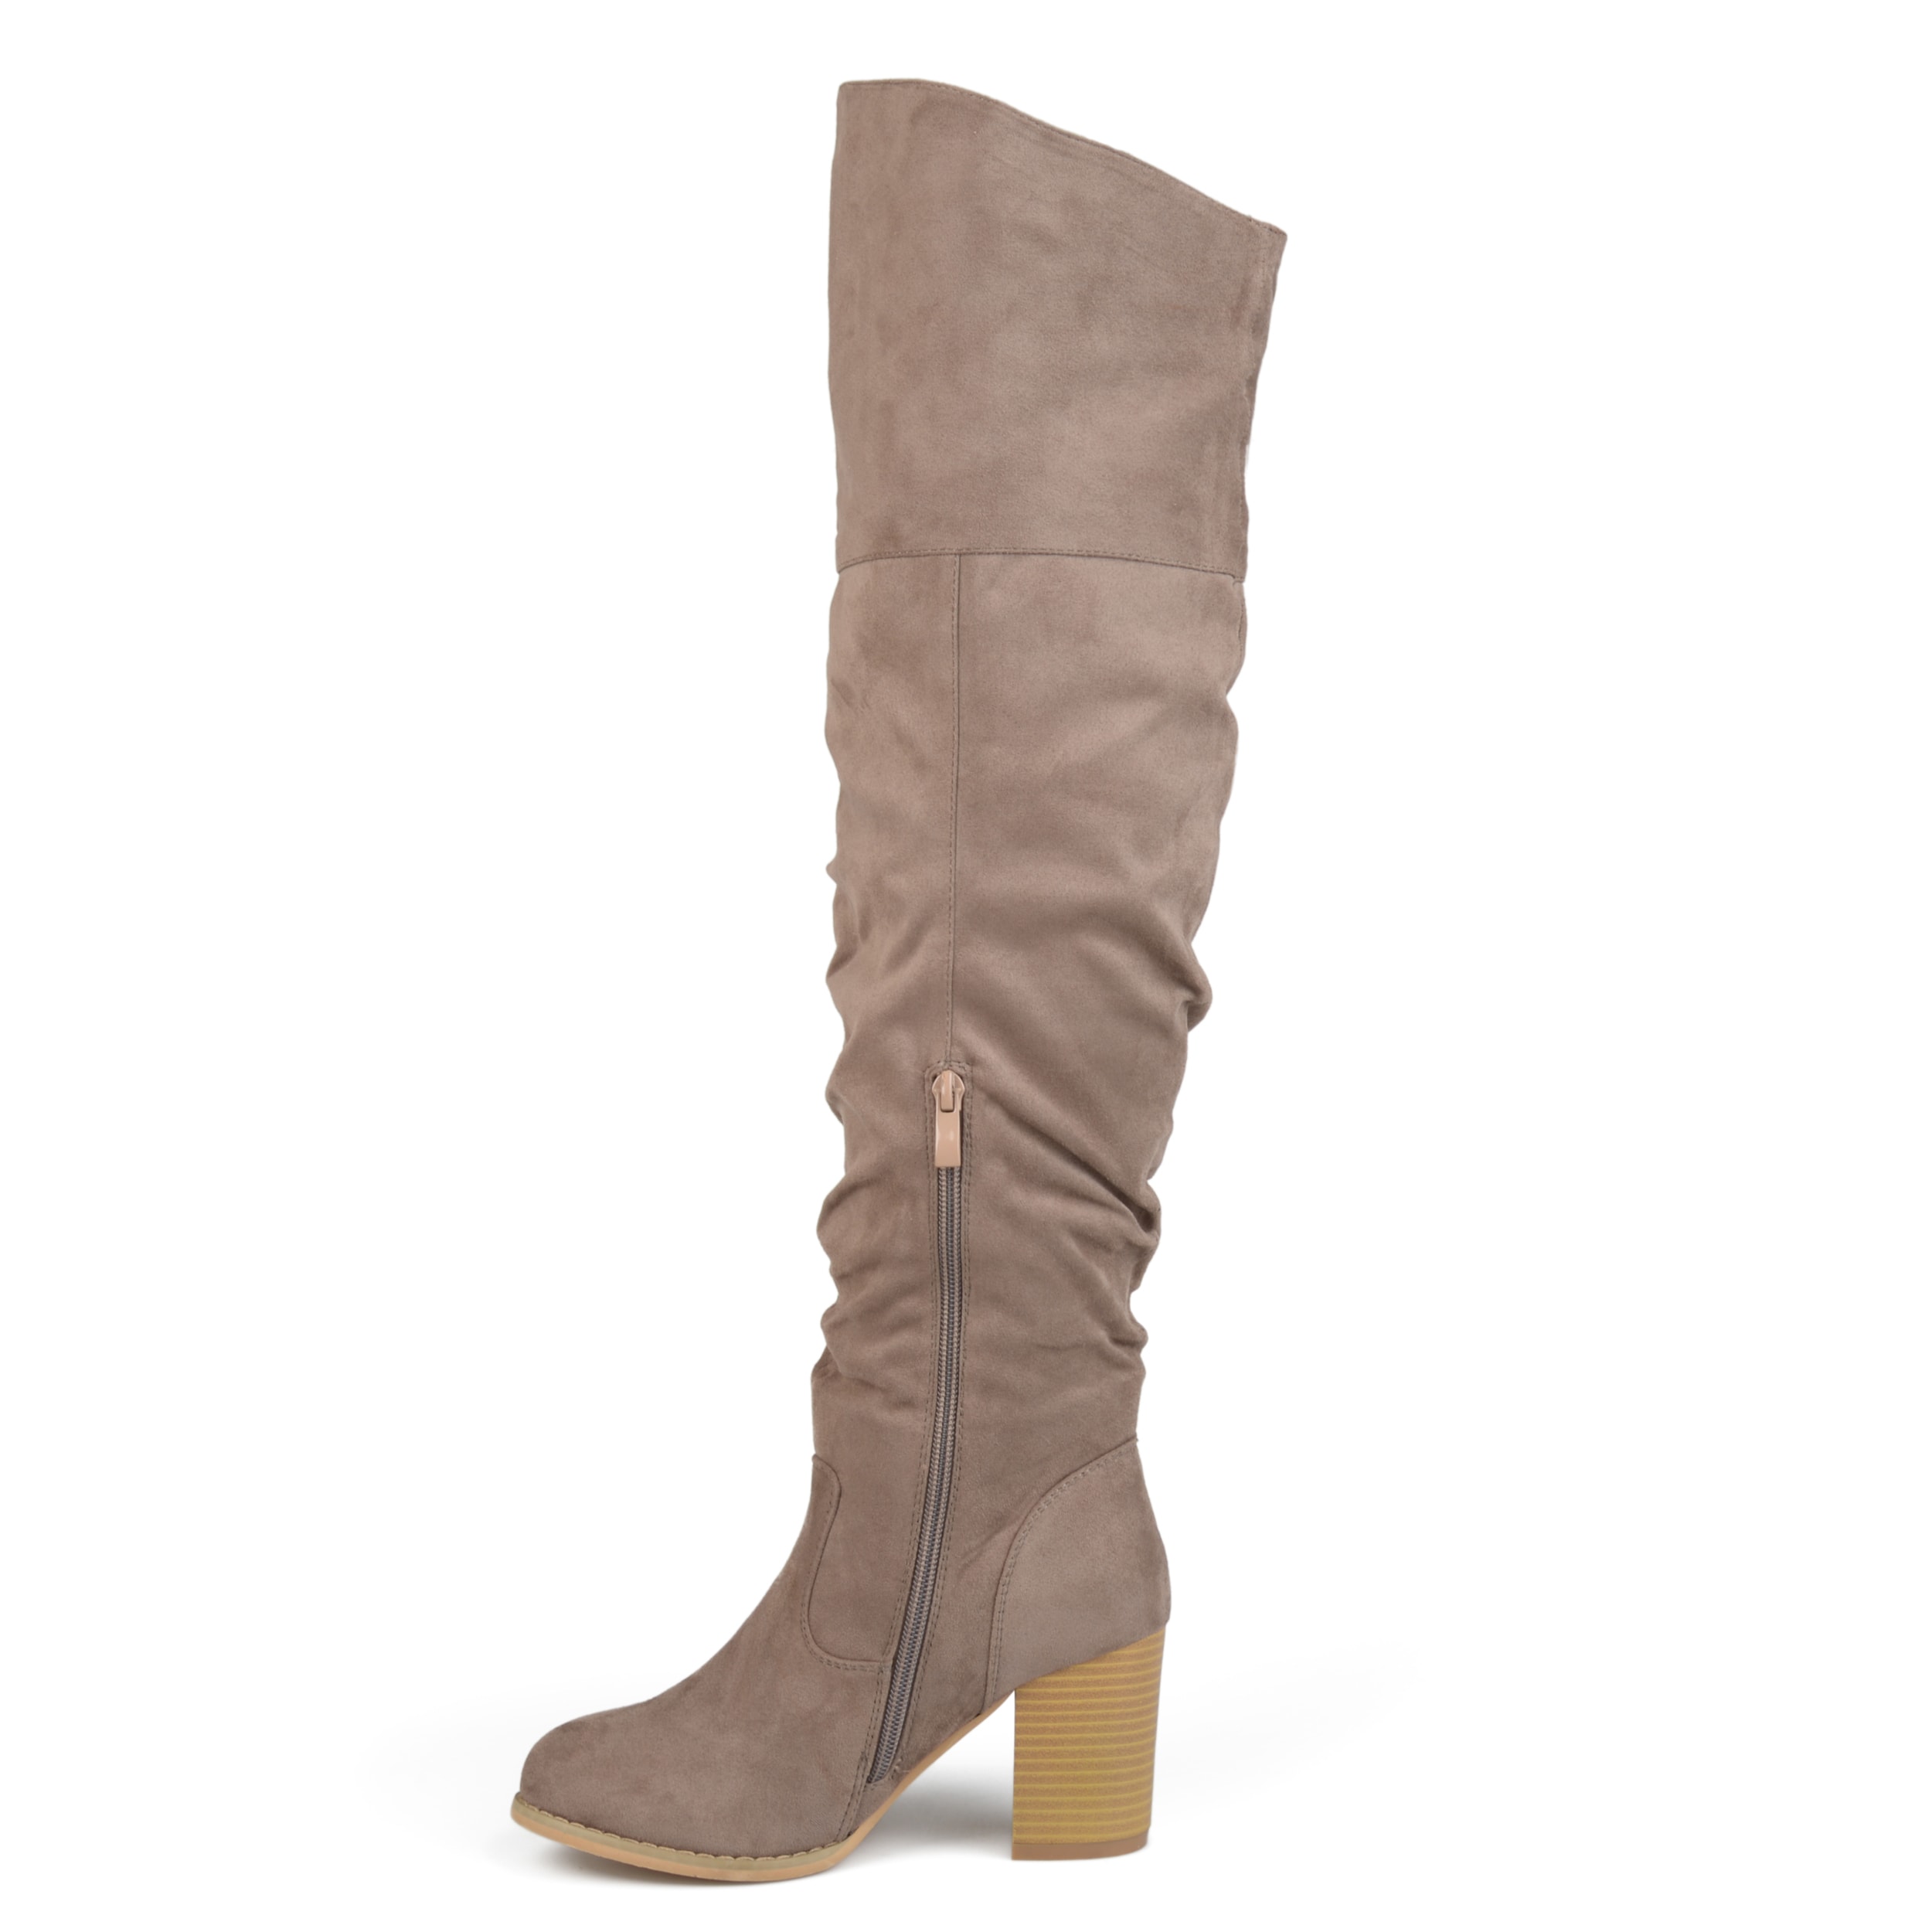 wide calf boots with a heel